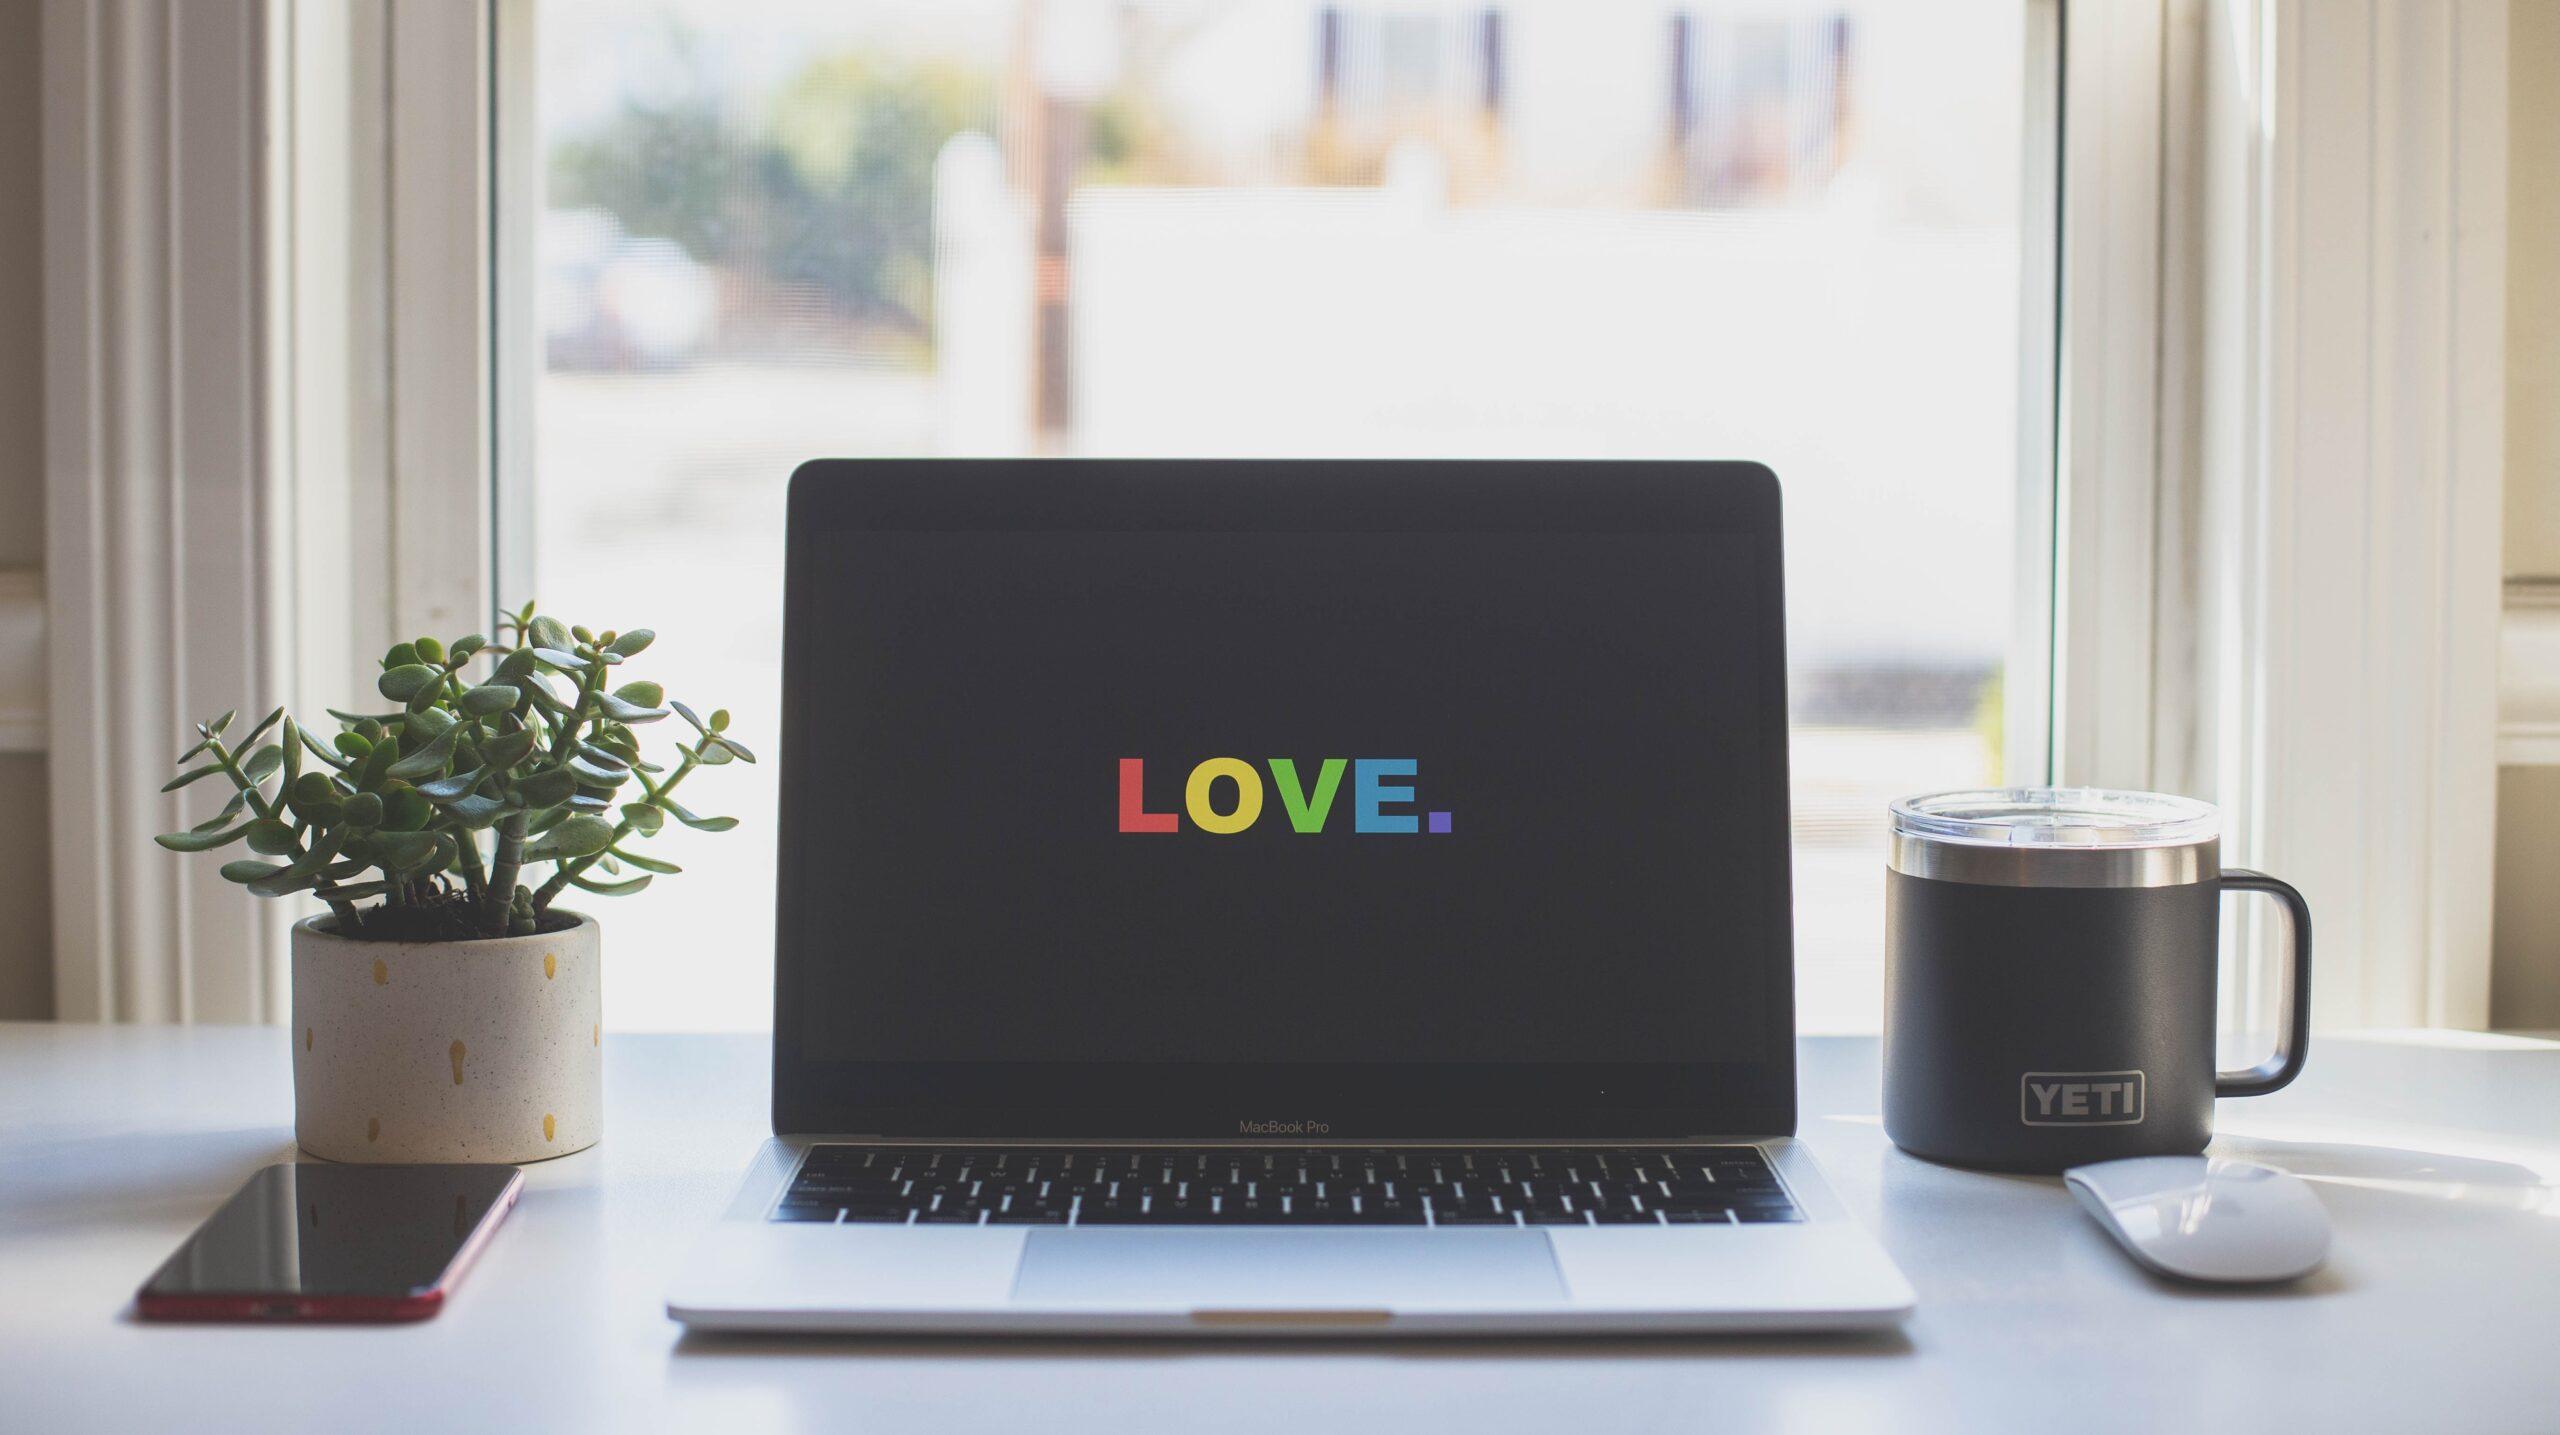 Laptop screen displaying the word 'Love'.